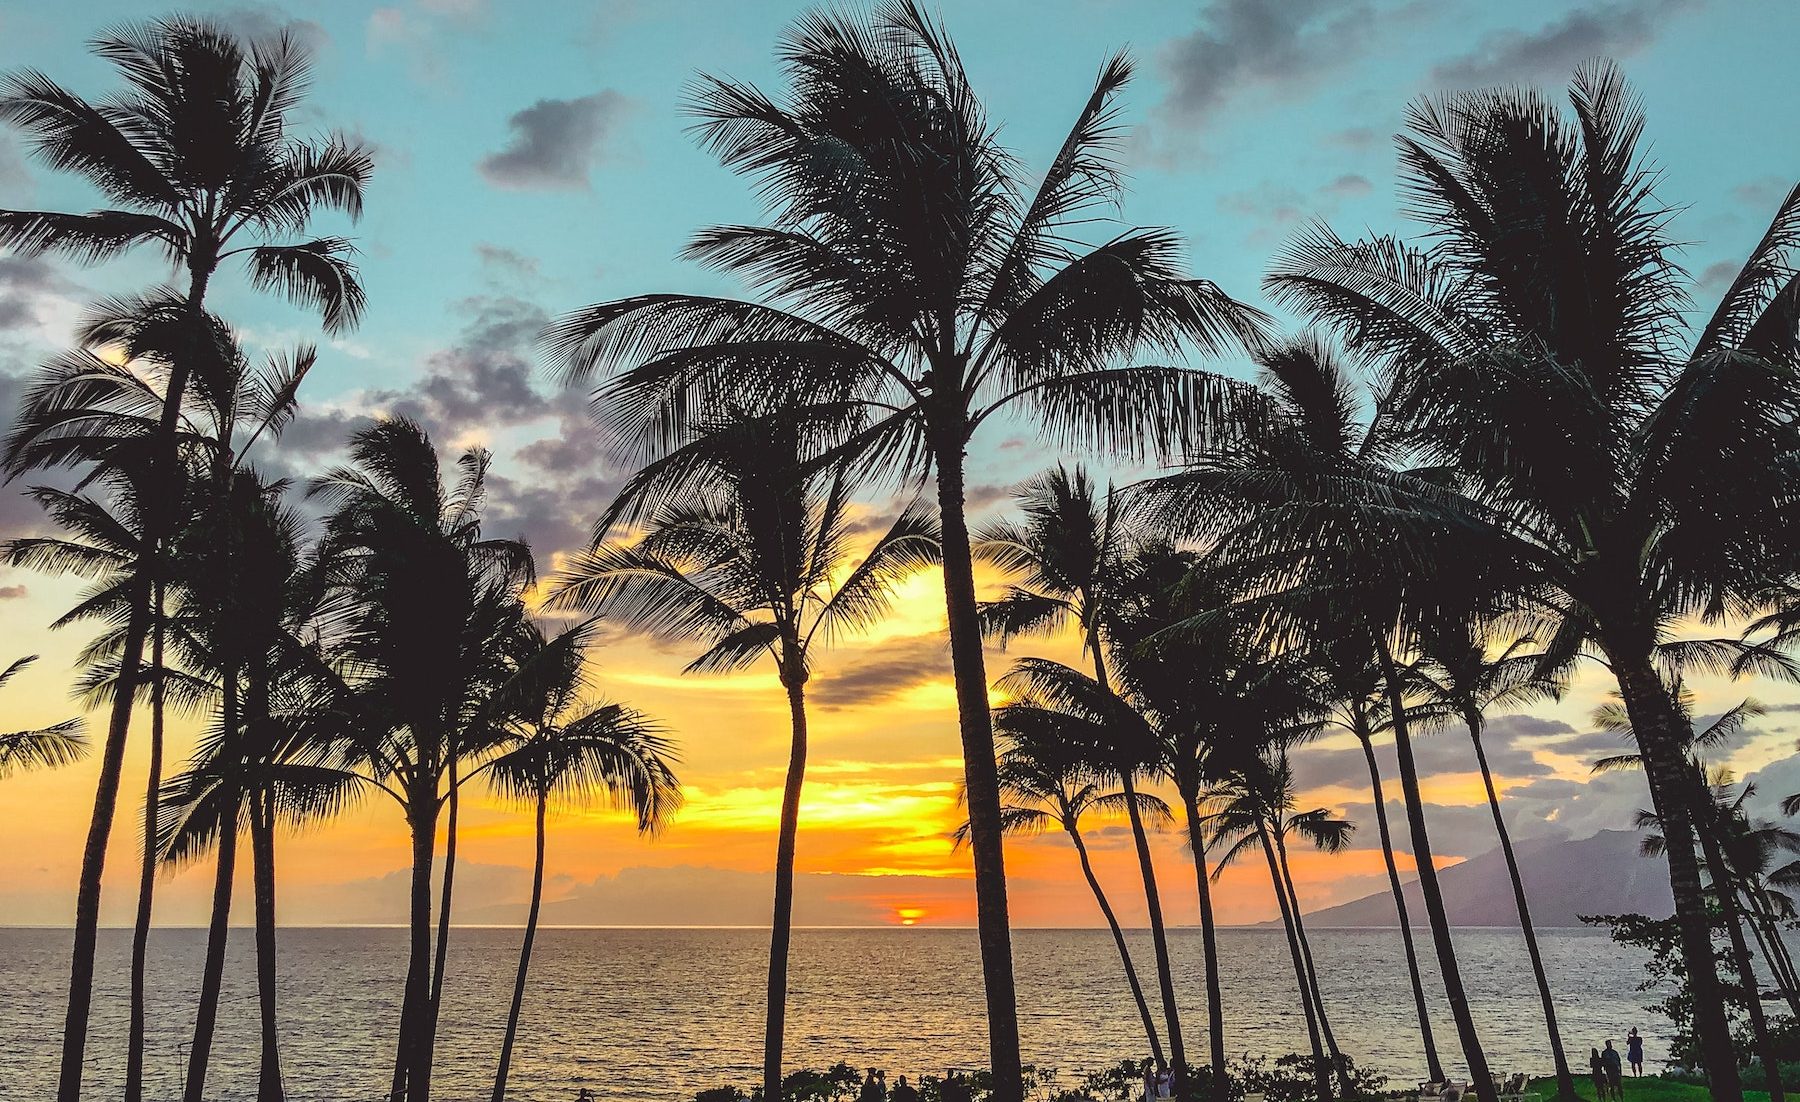 Where to Find Stunning Views of the Maui Sunset PMI Maui